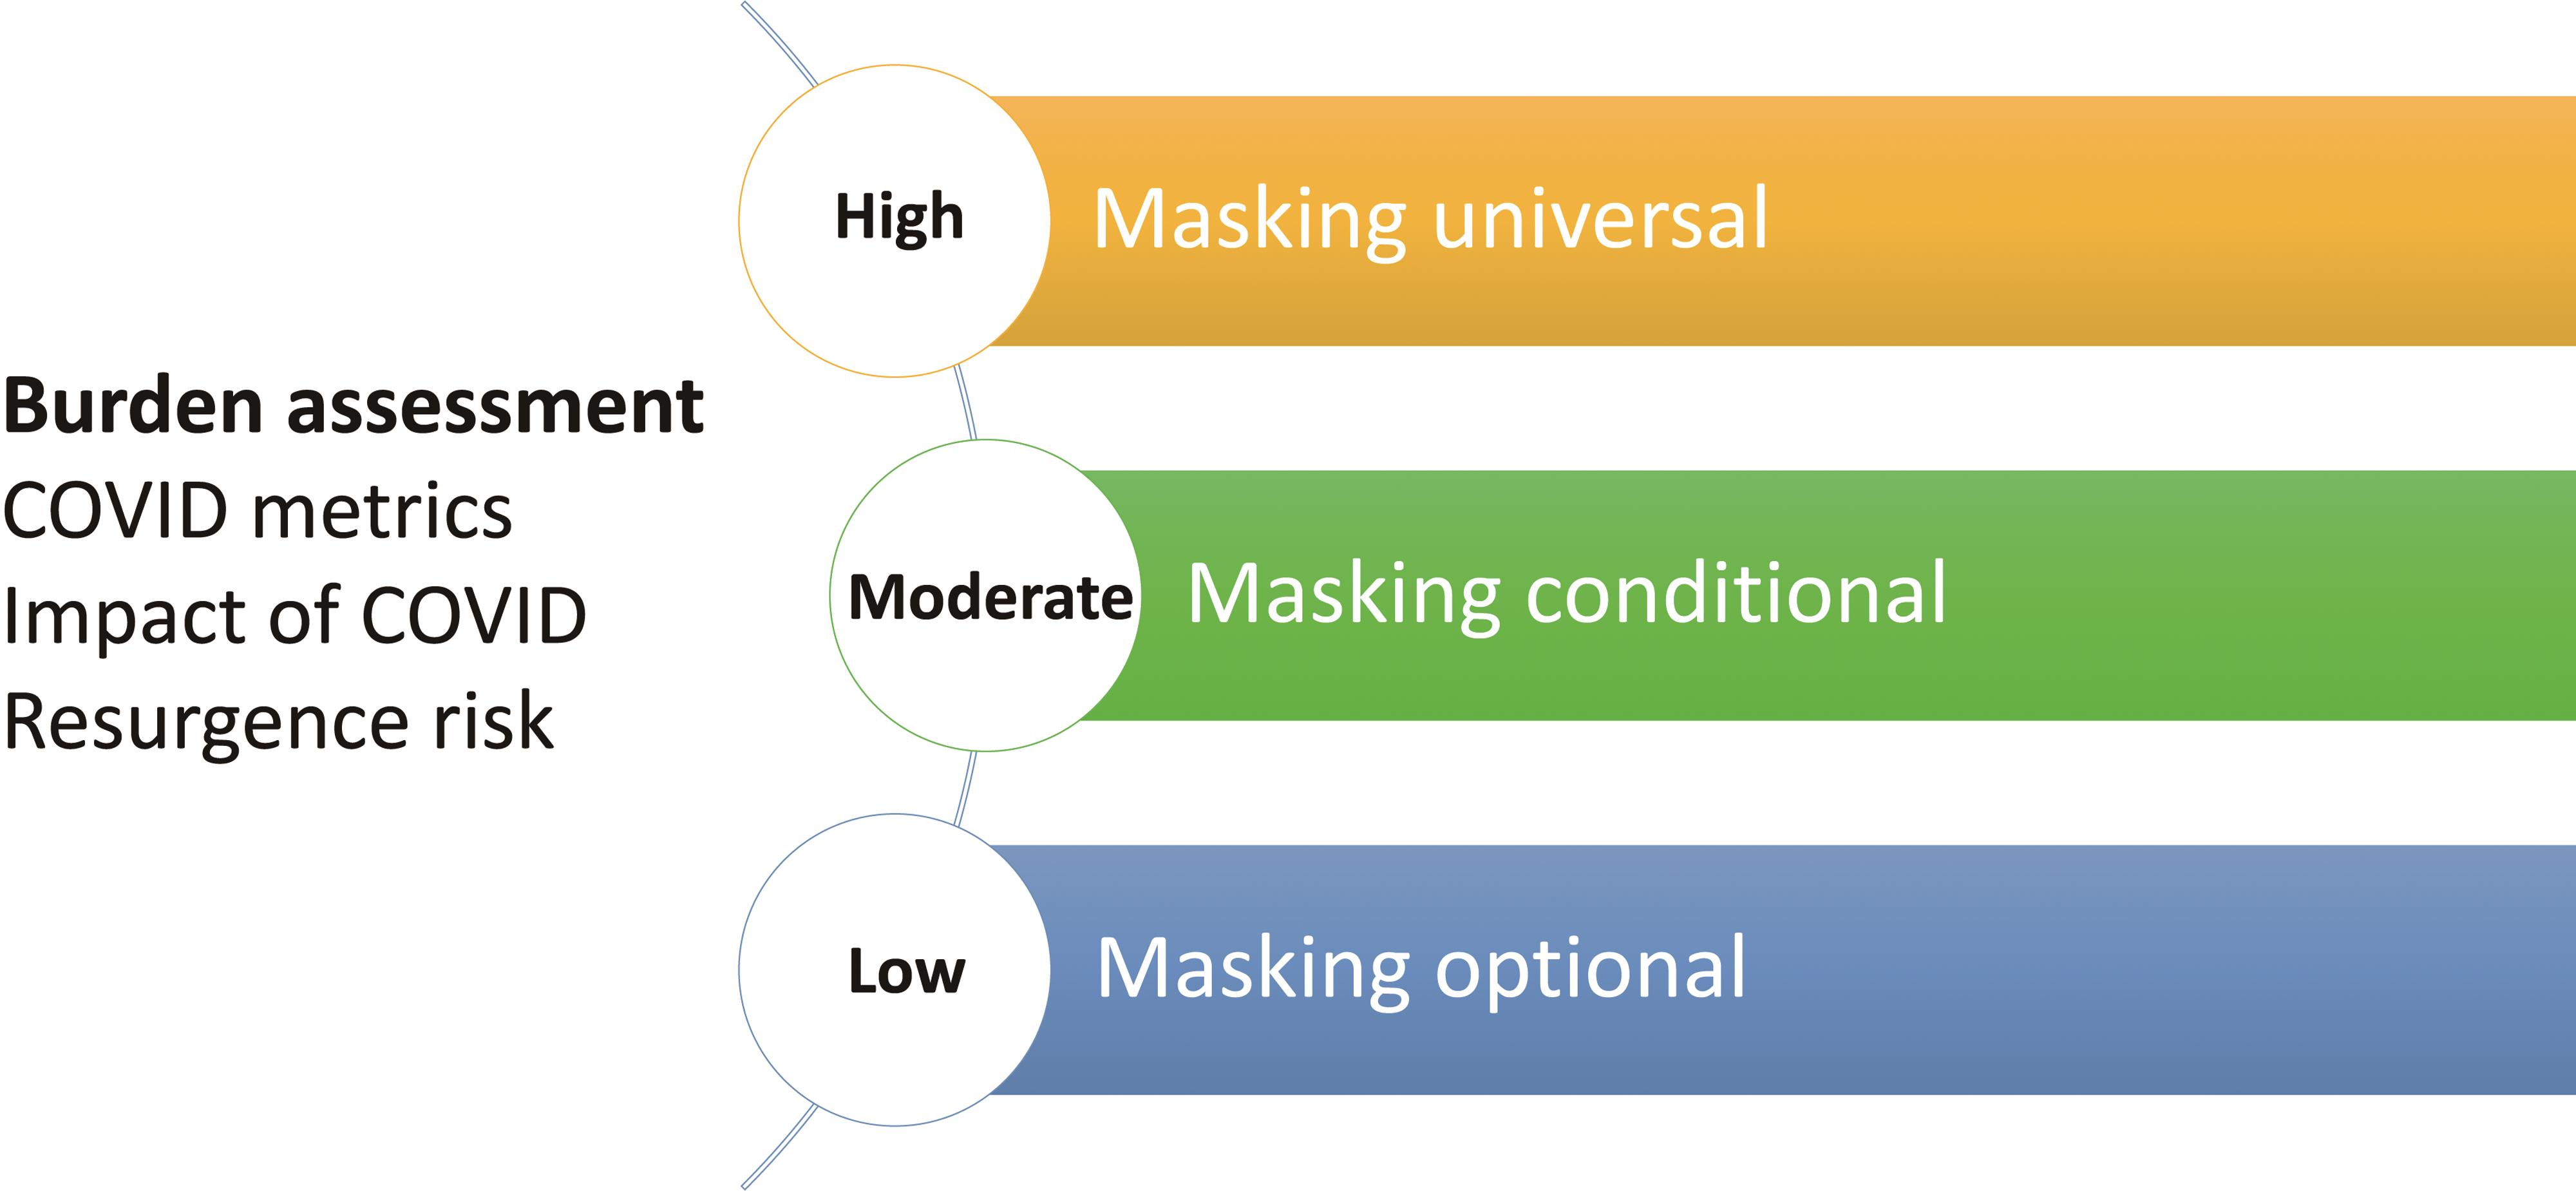 A data-driven, dynamic and flexible approach to lifting mask mandates.